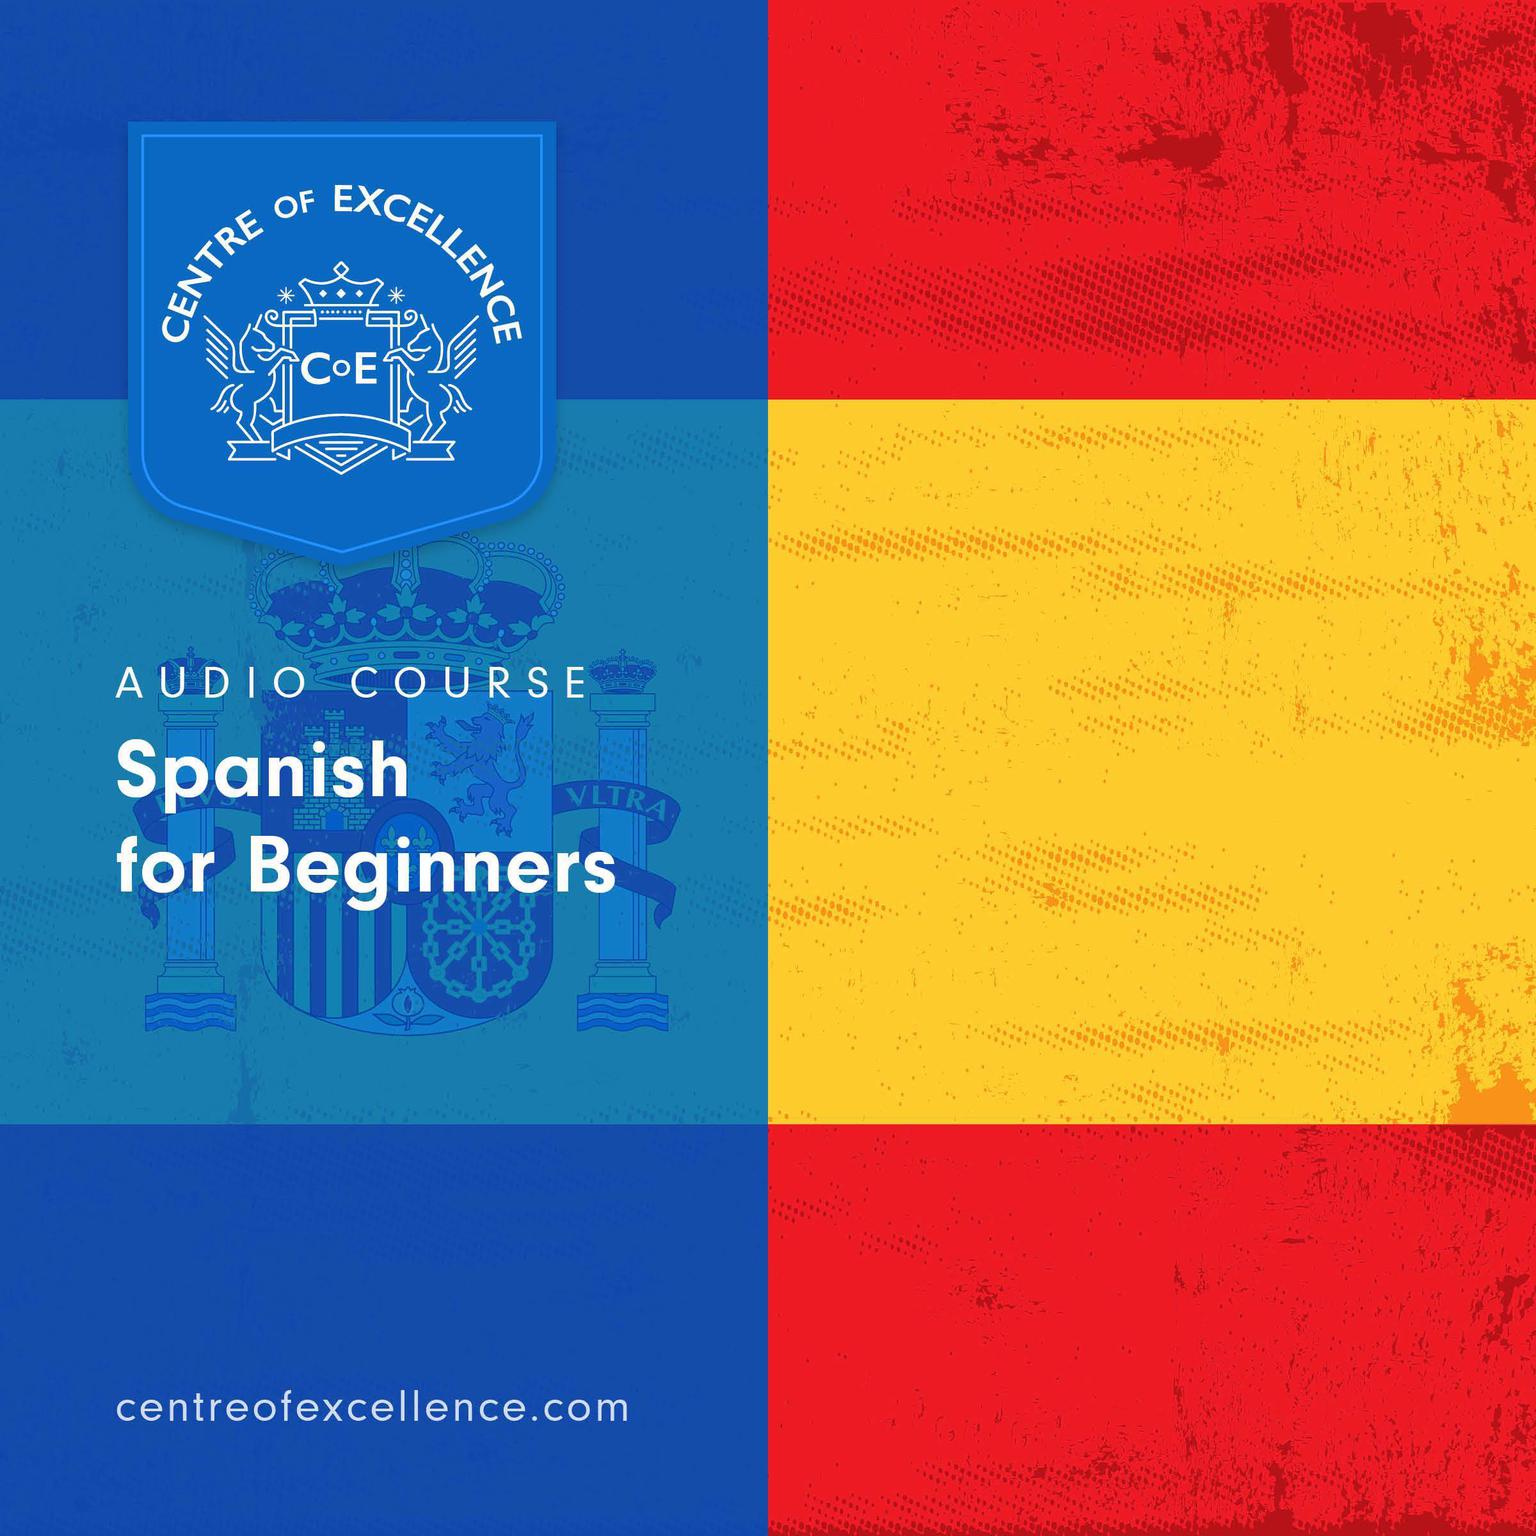 Spanish for Beginners Audiobook Audiobook, by Centre of Excellence